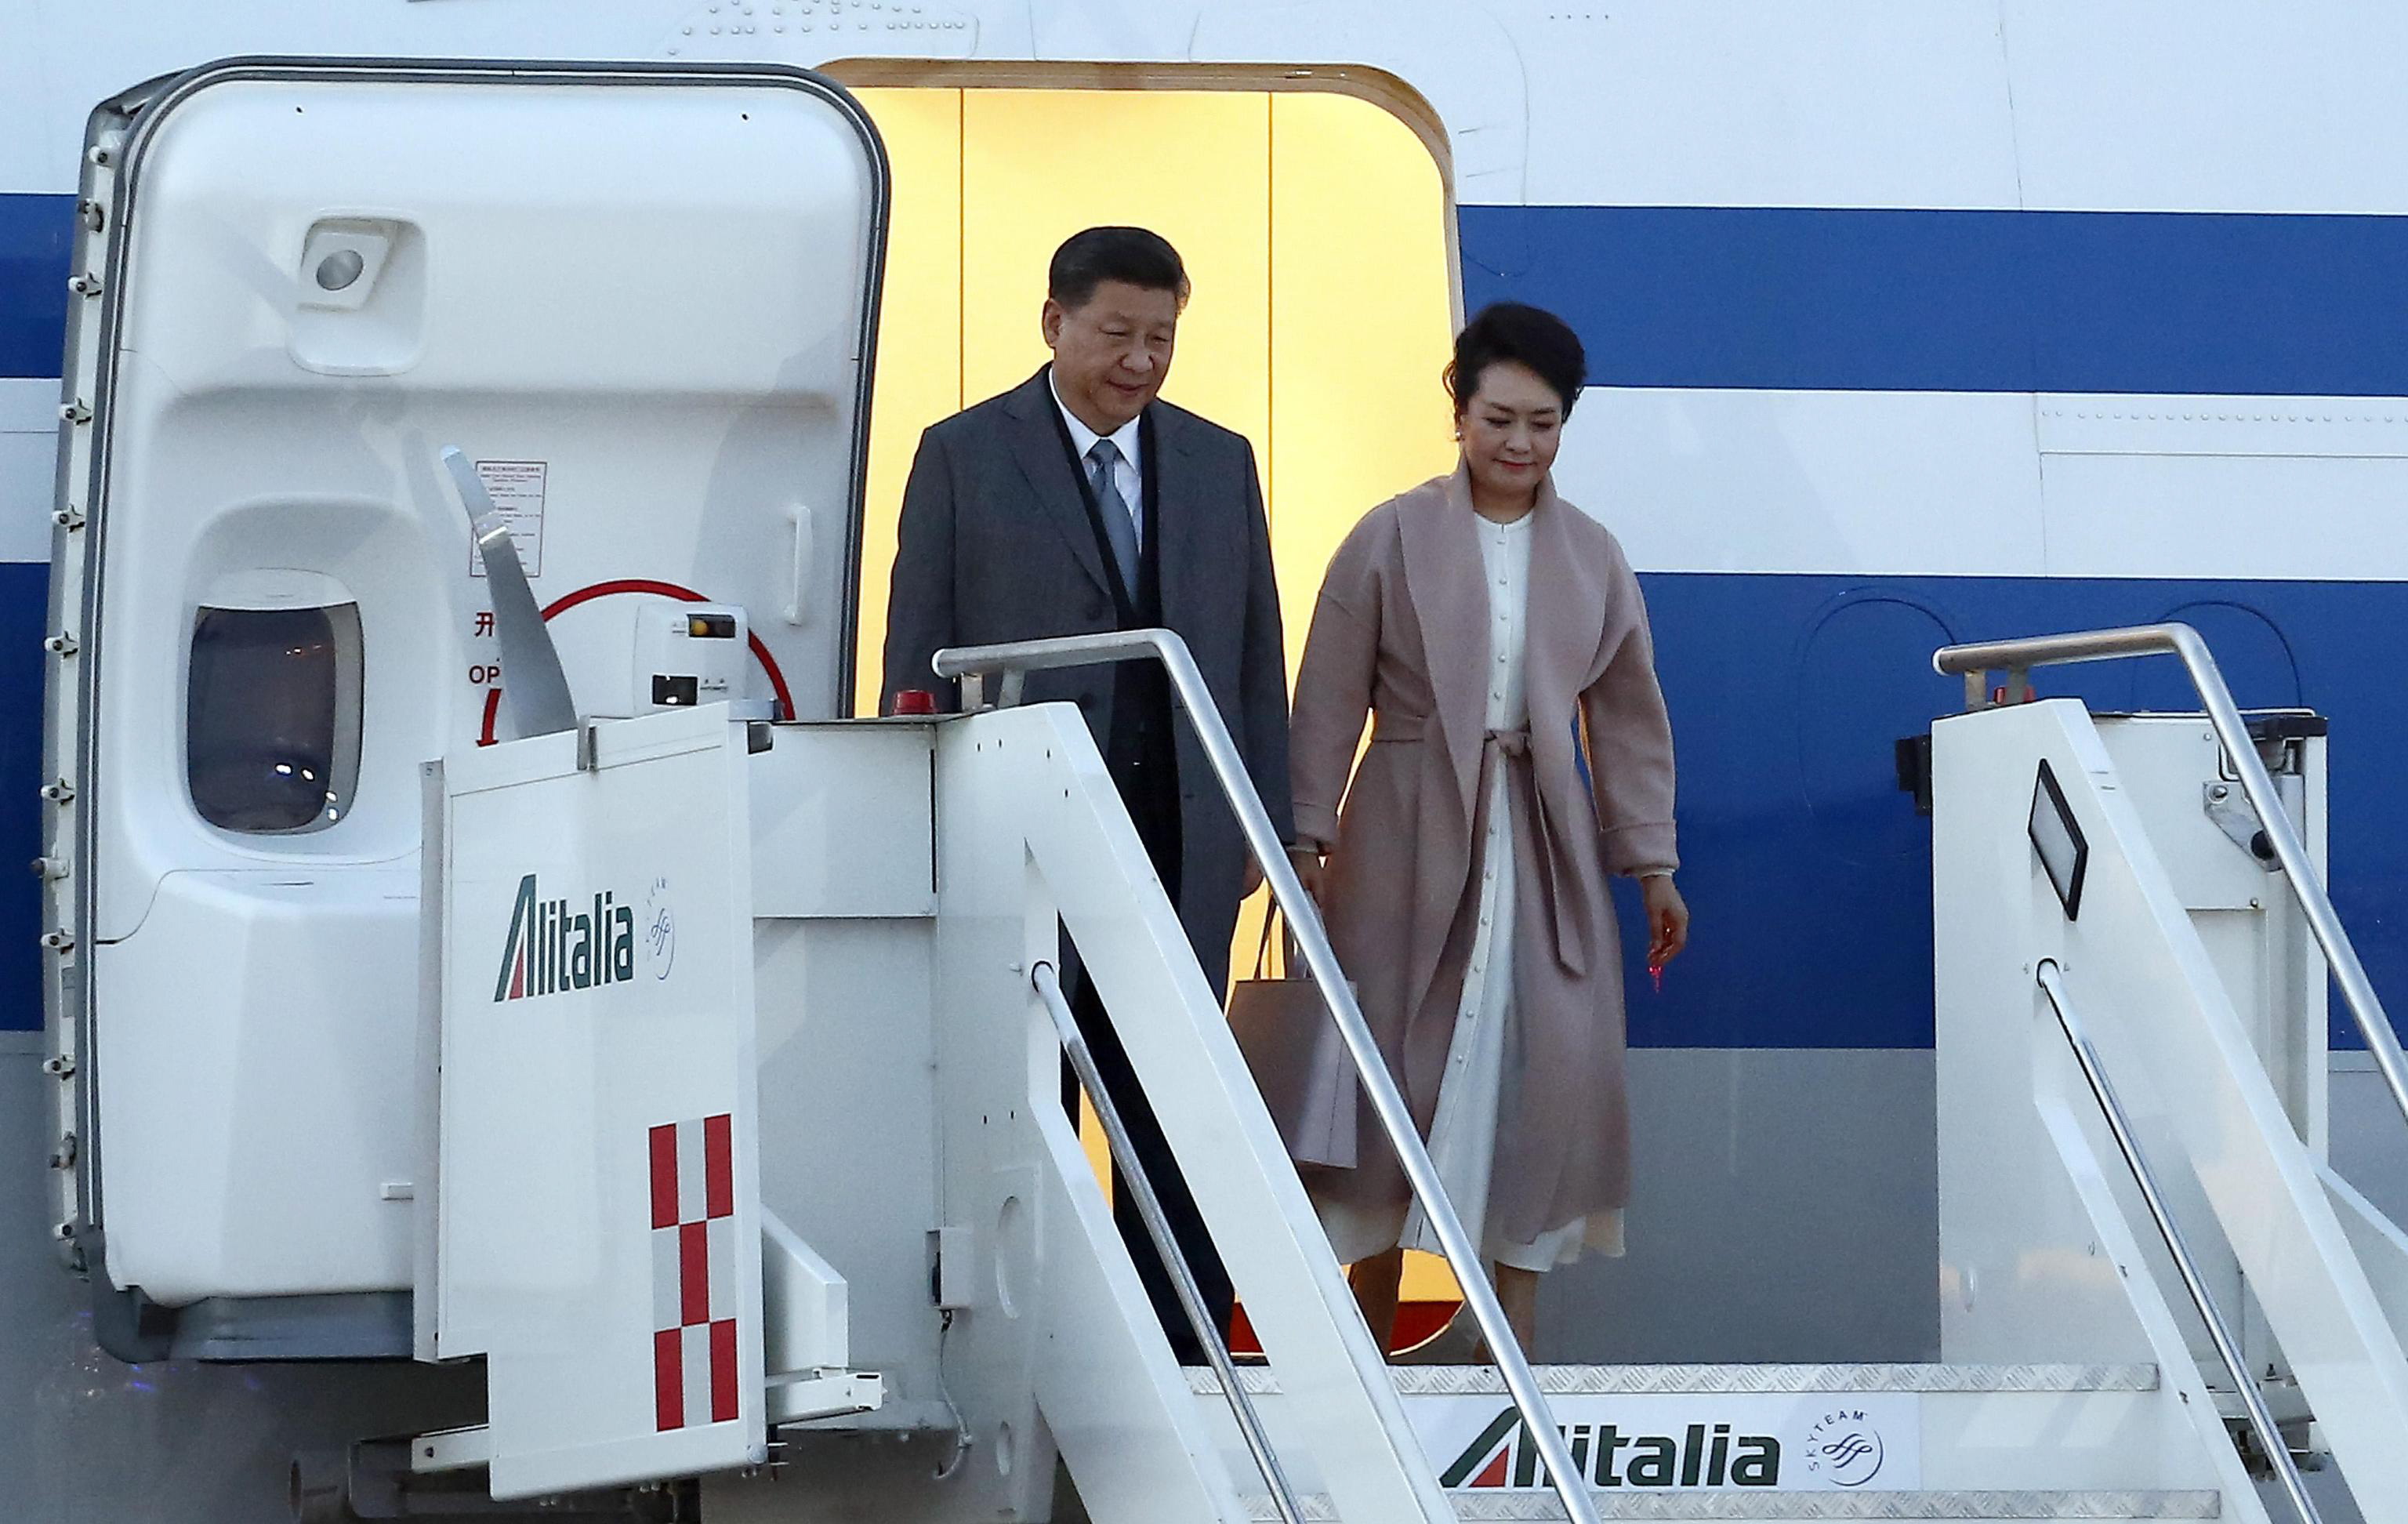 epa07454094 Chinese President Xi Jinping (L) and his wife Peng Liyuan (R) arrive at Rome's Leonardo Da Vinci airport in Fiumicino, Rome, Italy, 21 March 2019. Jinping is in Italy to sign a memorandum of understanding to make Italy the first Group of Seven leading democracies to join China's ambitious Belt and Road infrastructure project.  EPA/STR